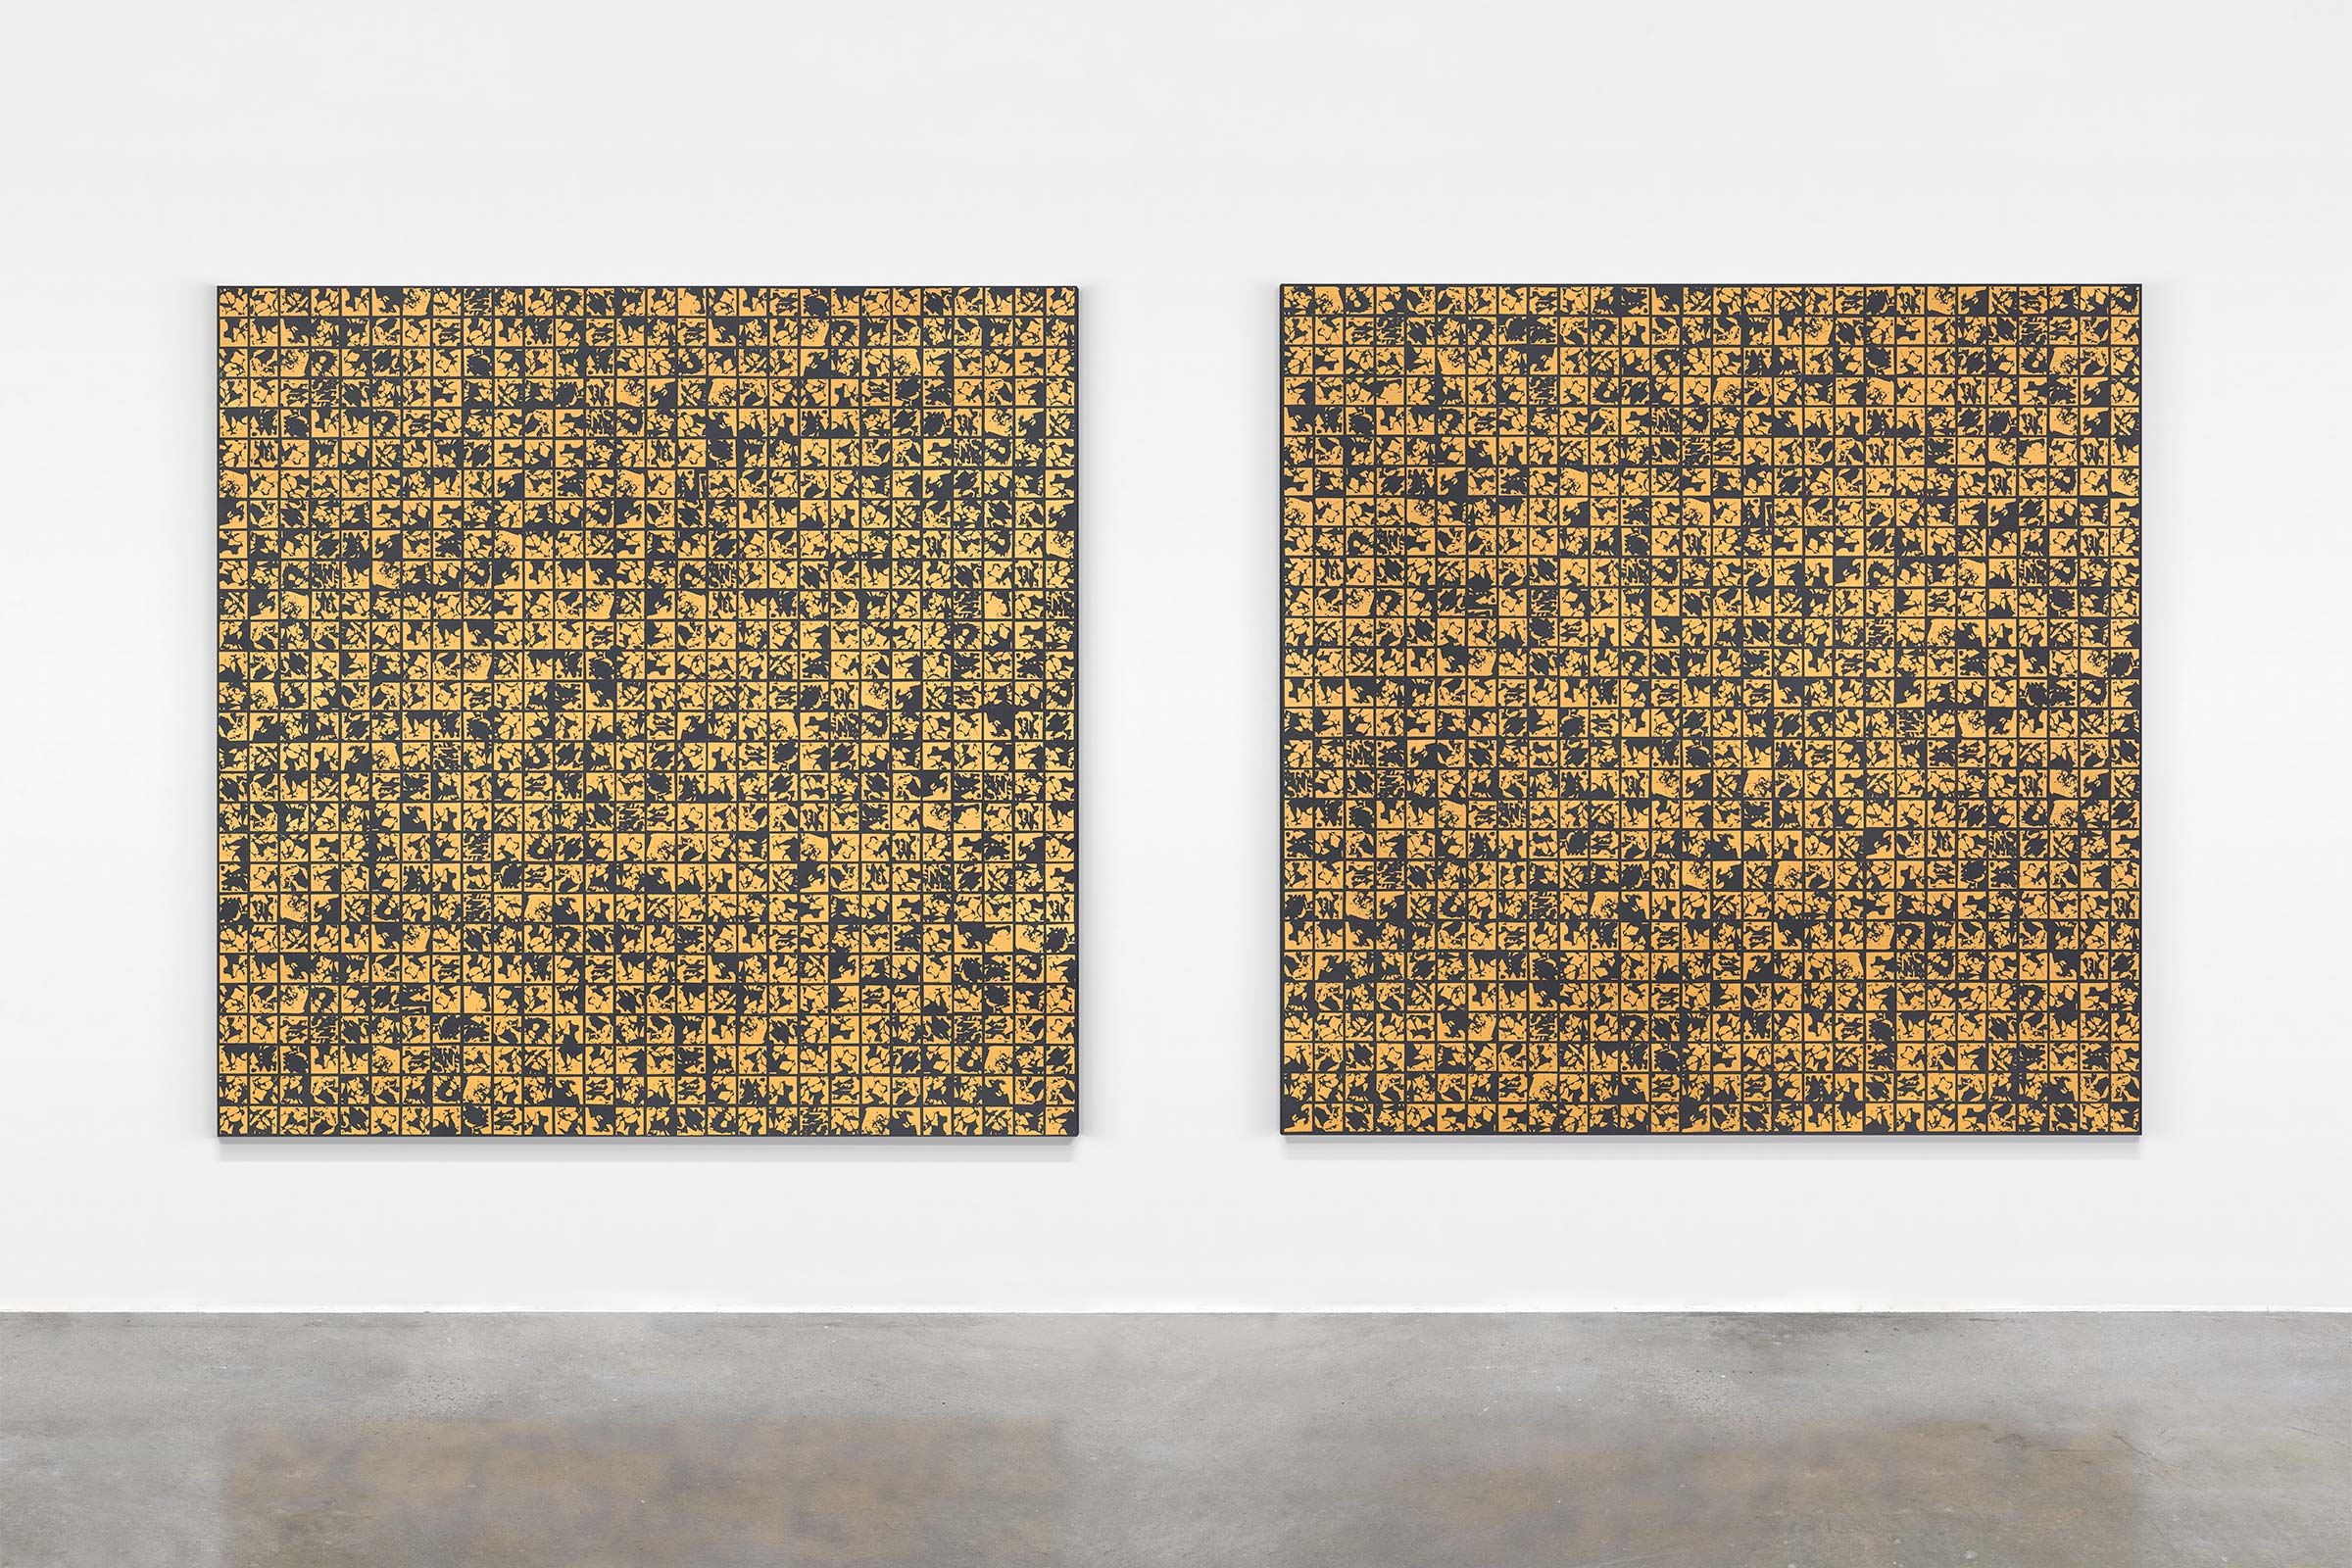 Artwork documentation of two large paintings made with gold and black patterns installed on a white wall of an art gallery.